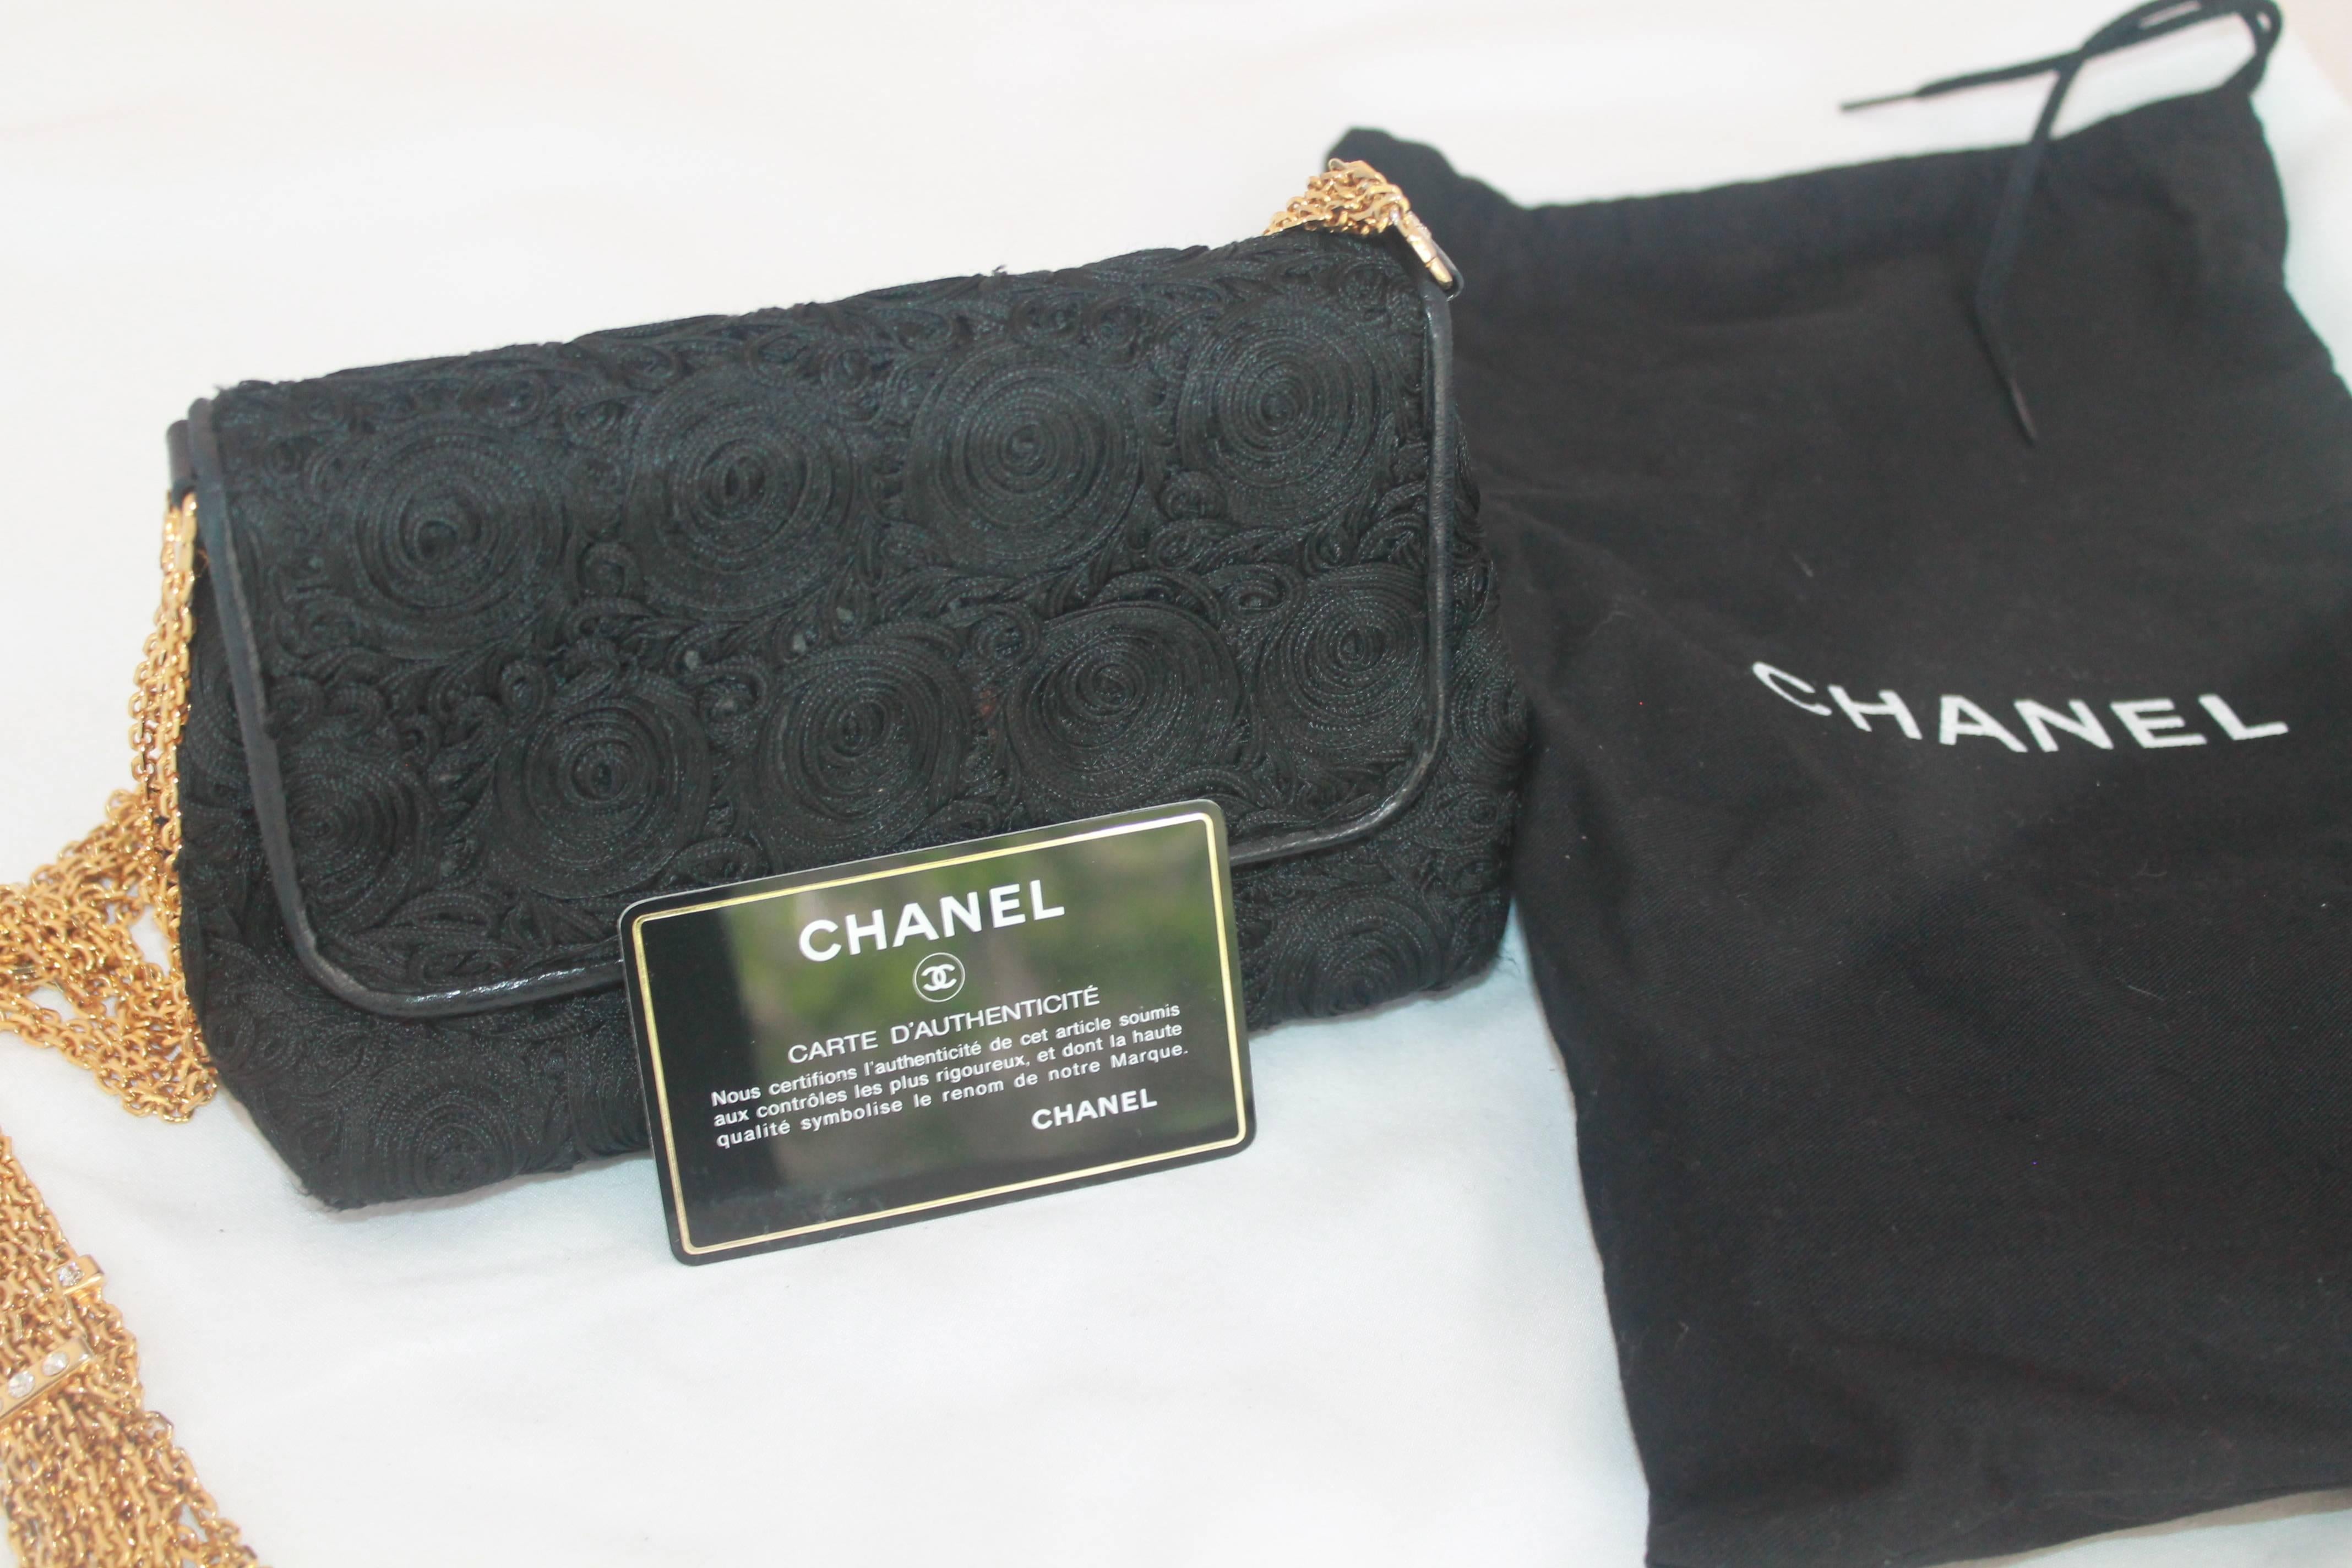 Chanel Black Lace Soutache and Leather Evening Bag - Circa Late 1980's 6